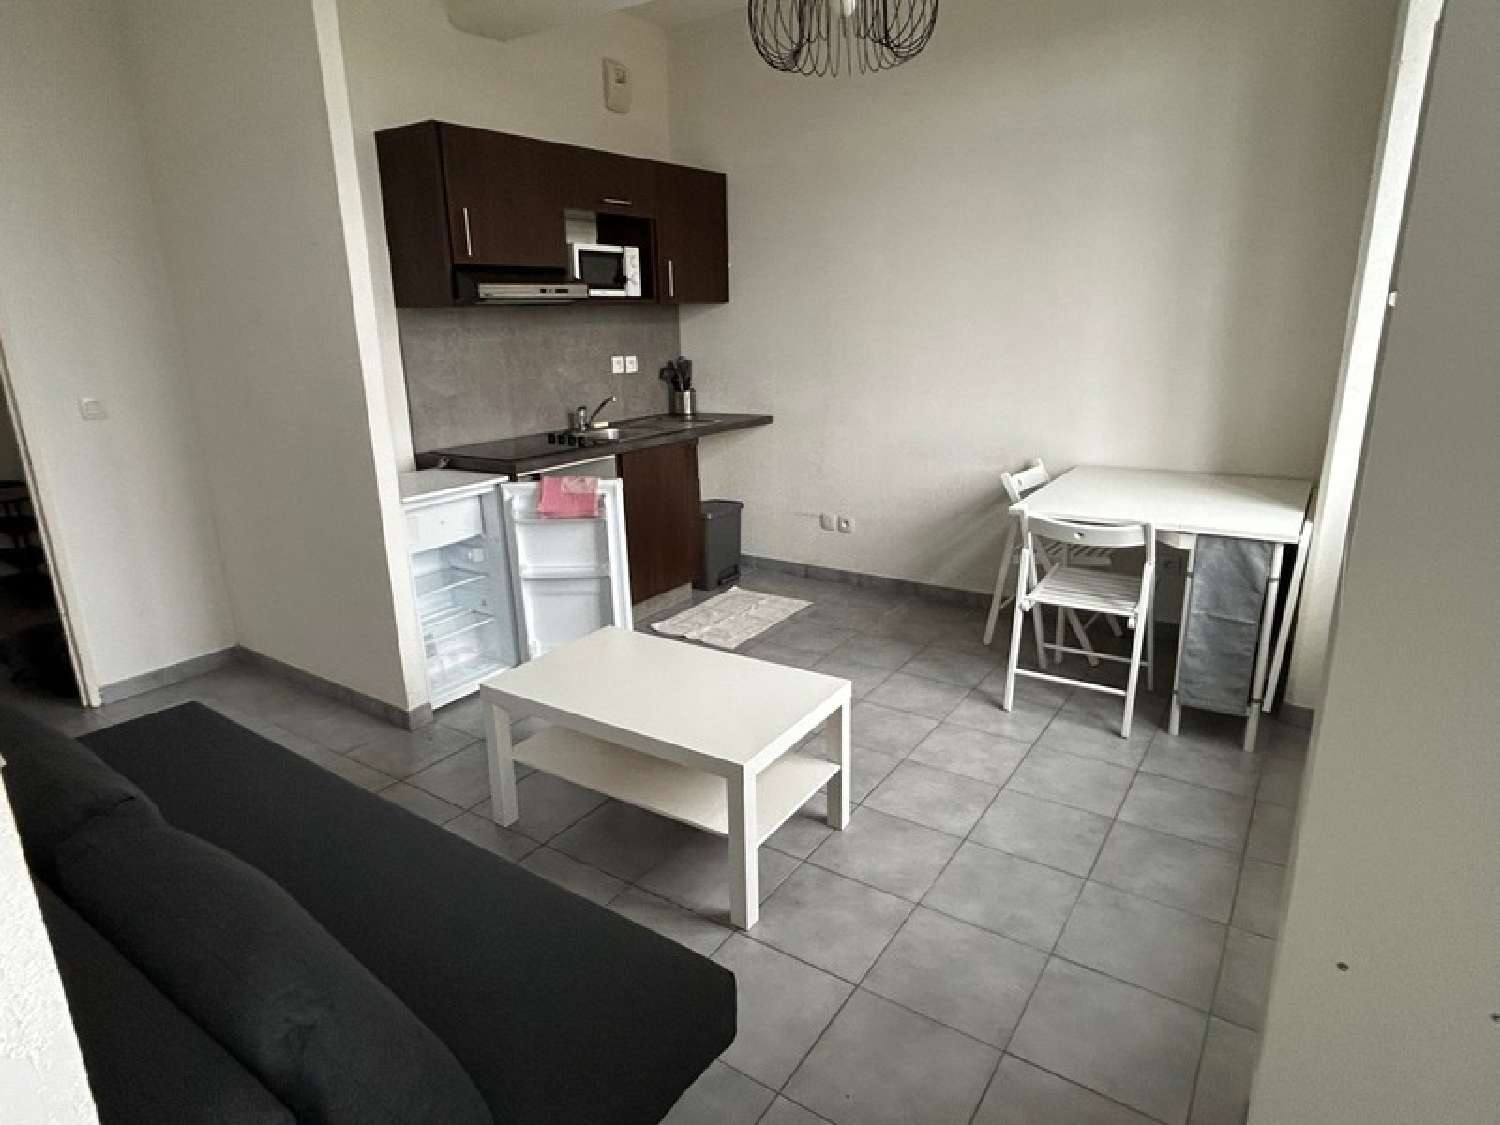  à vendre appartement Tourcoing Nord 3